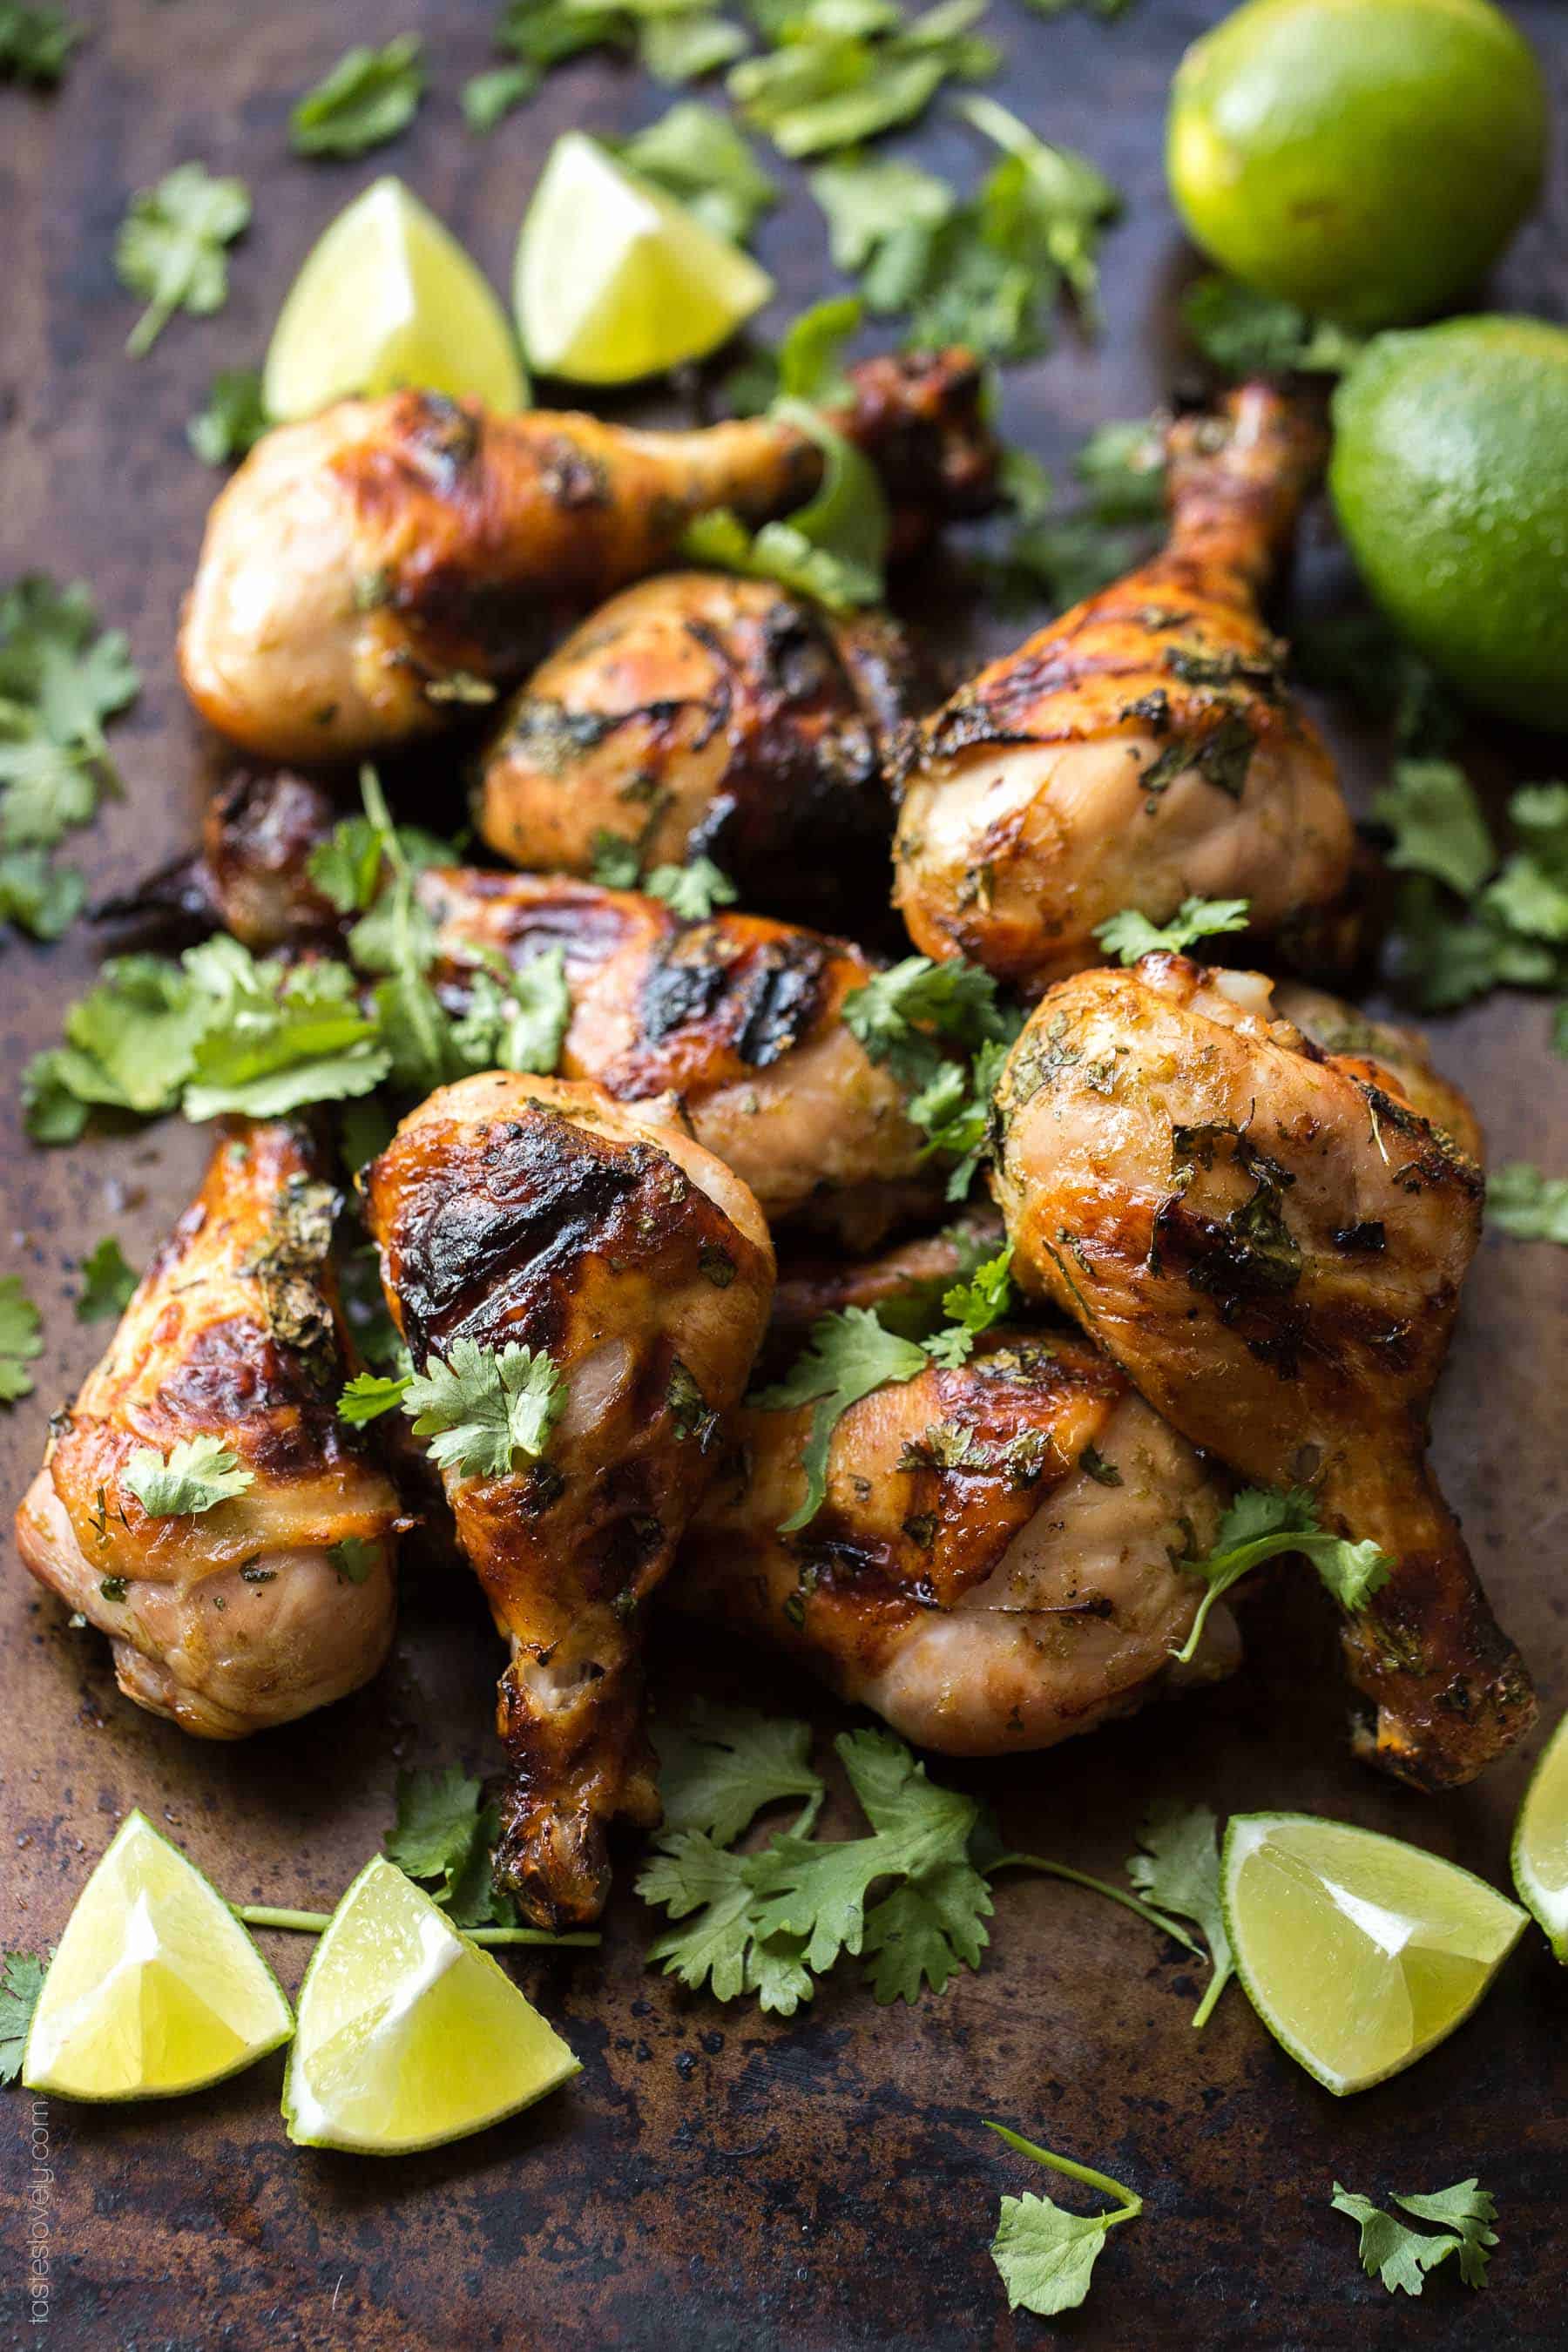 Paleo Cilantro Honey Lime Chicken Drumsticks - a delicious and healthy grilled dinner recipe! Paleo, gluten free, grain free, dairy free, refined sugar free.